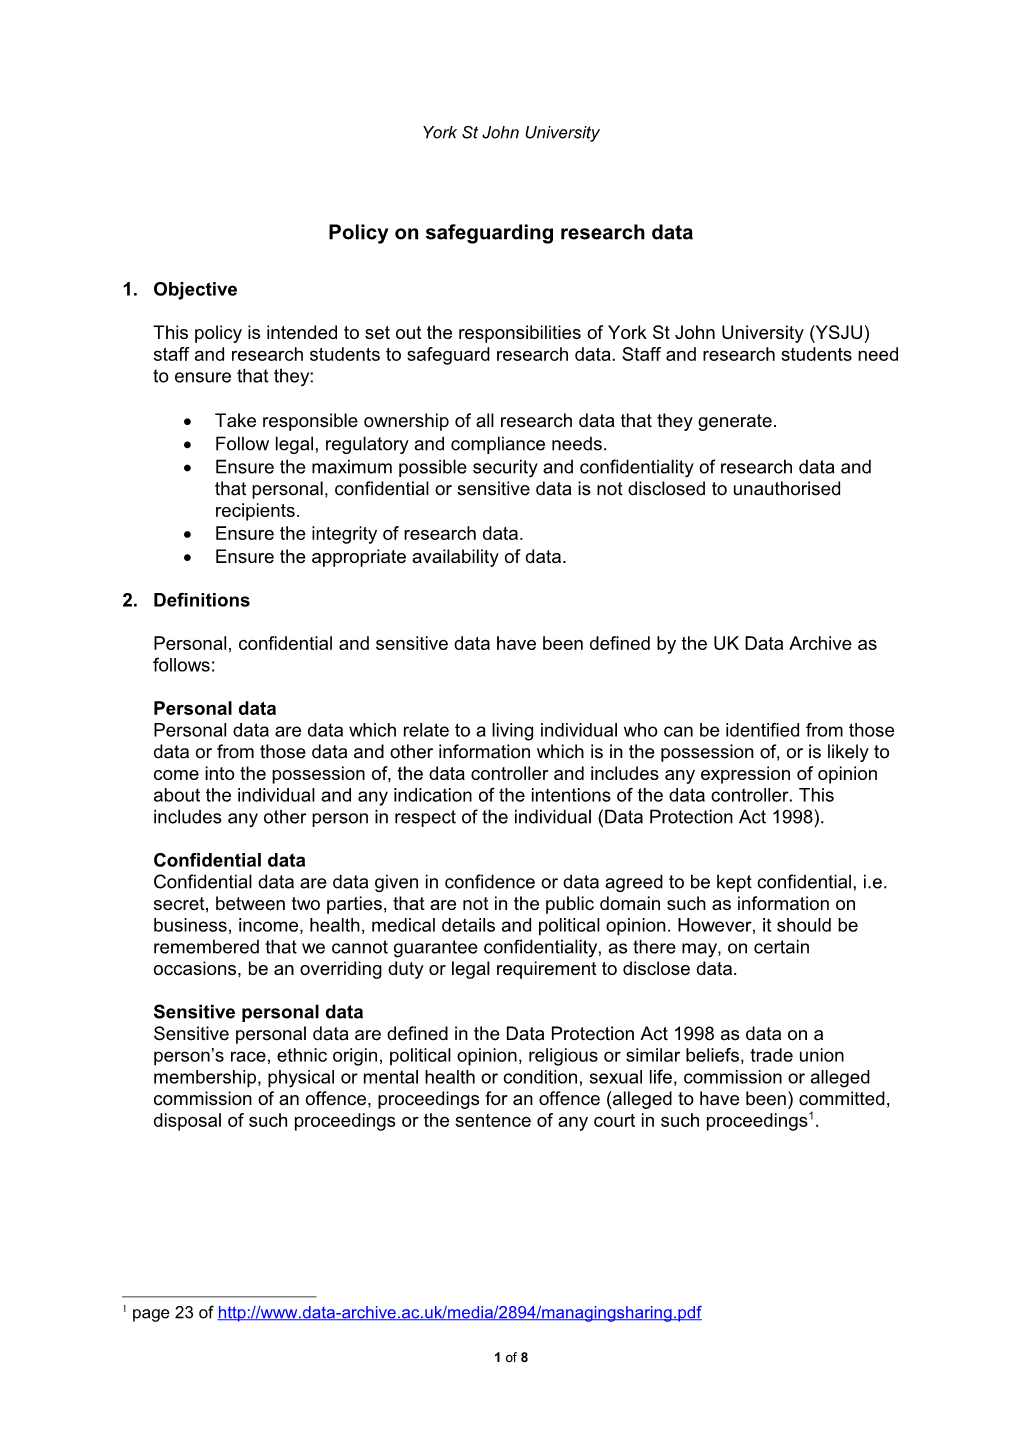 Policy on Safeguarding Research Data